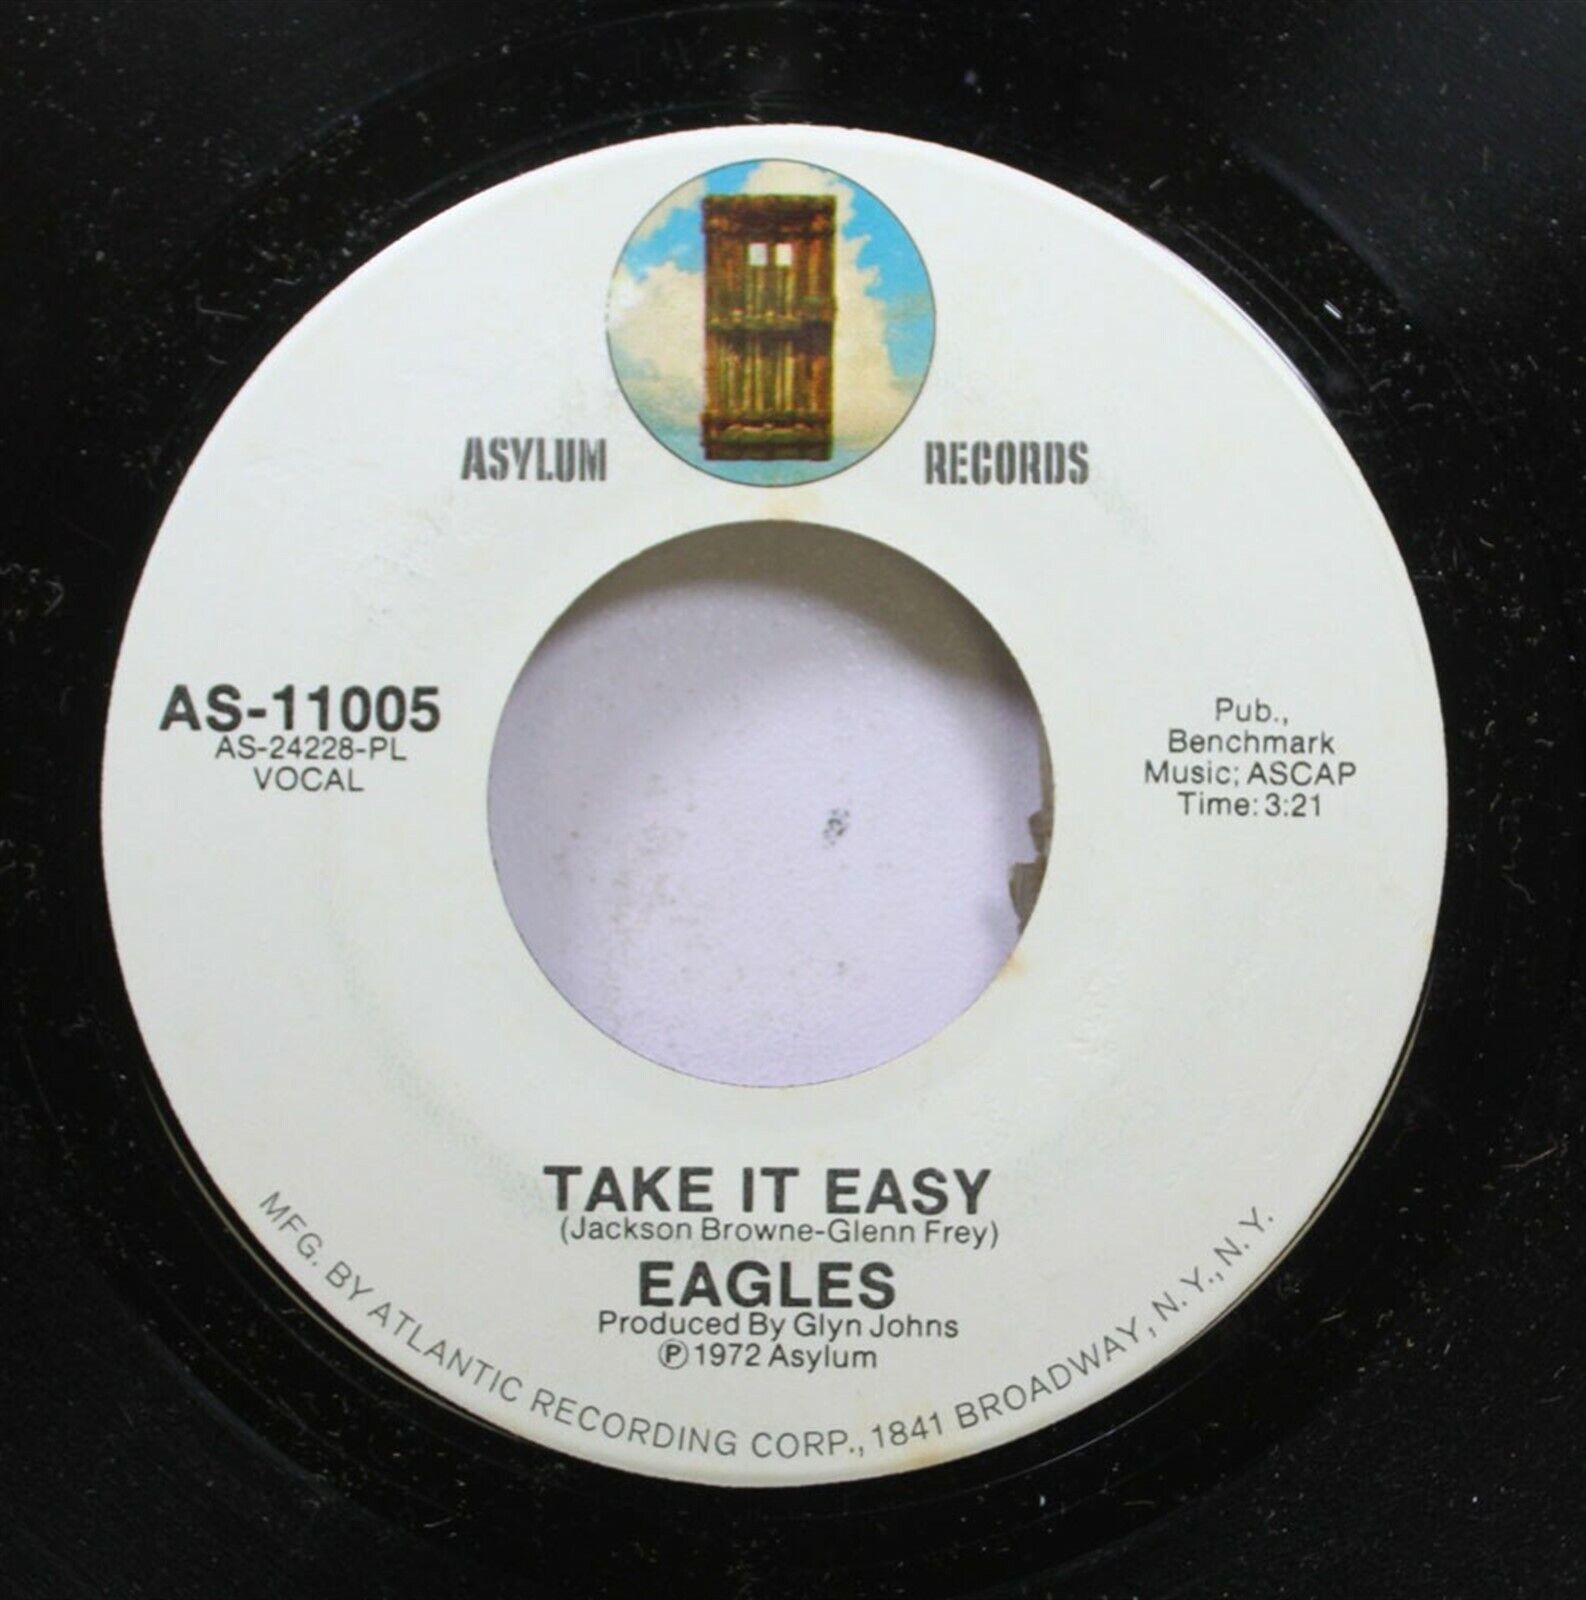 Rock New Old Stock NM 45 Eagles - Take It Easy / Get You In The Mood On Asylum